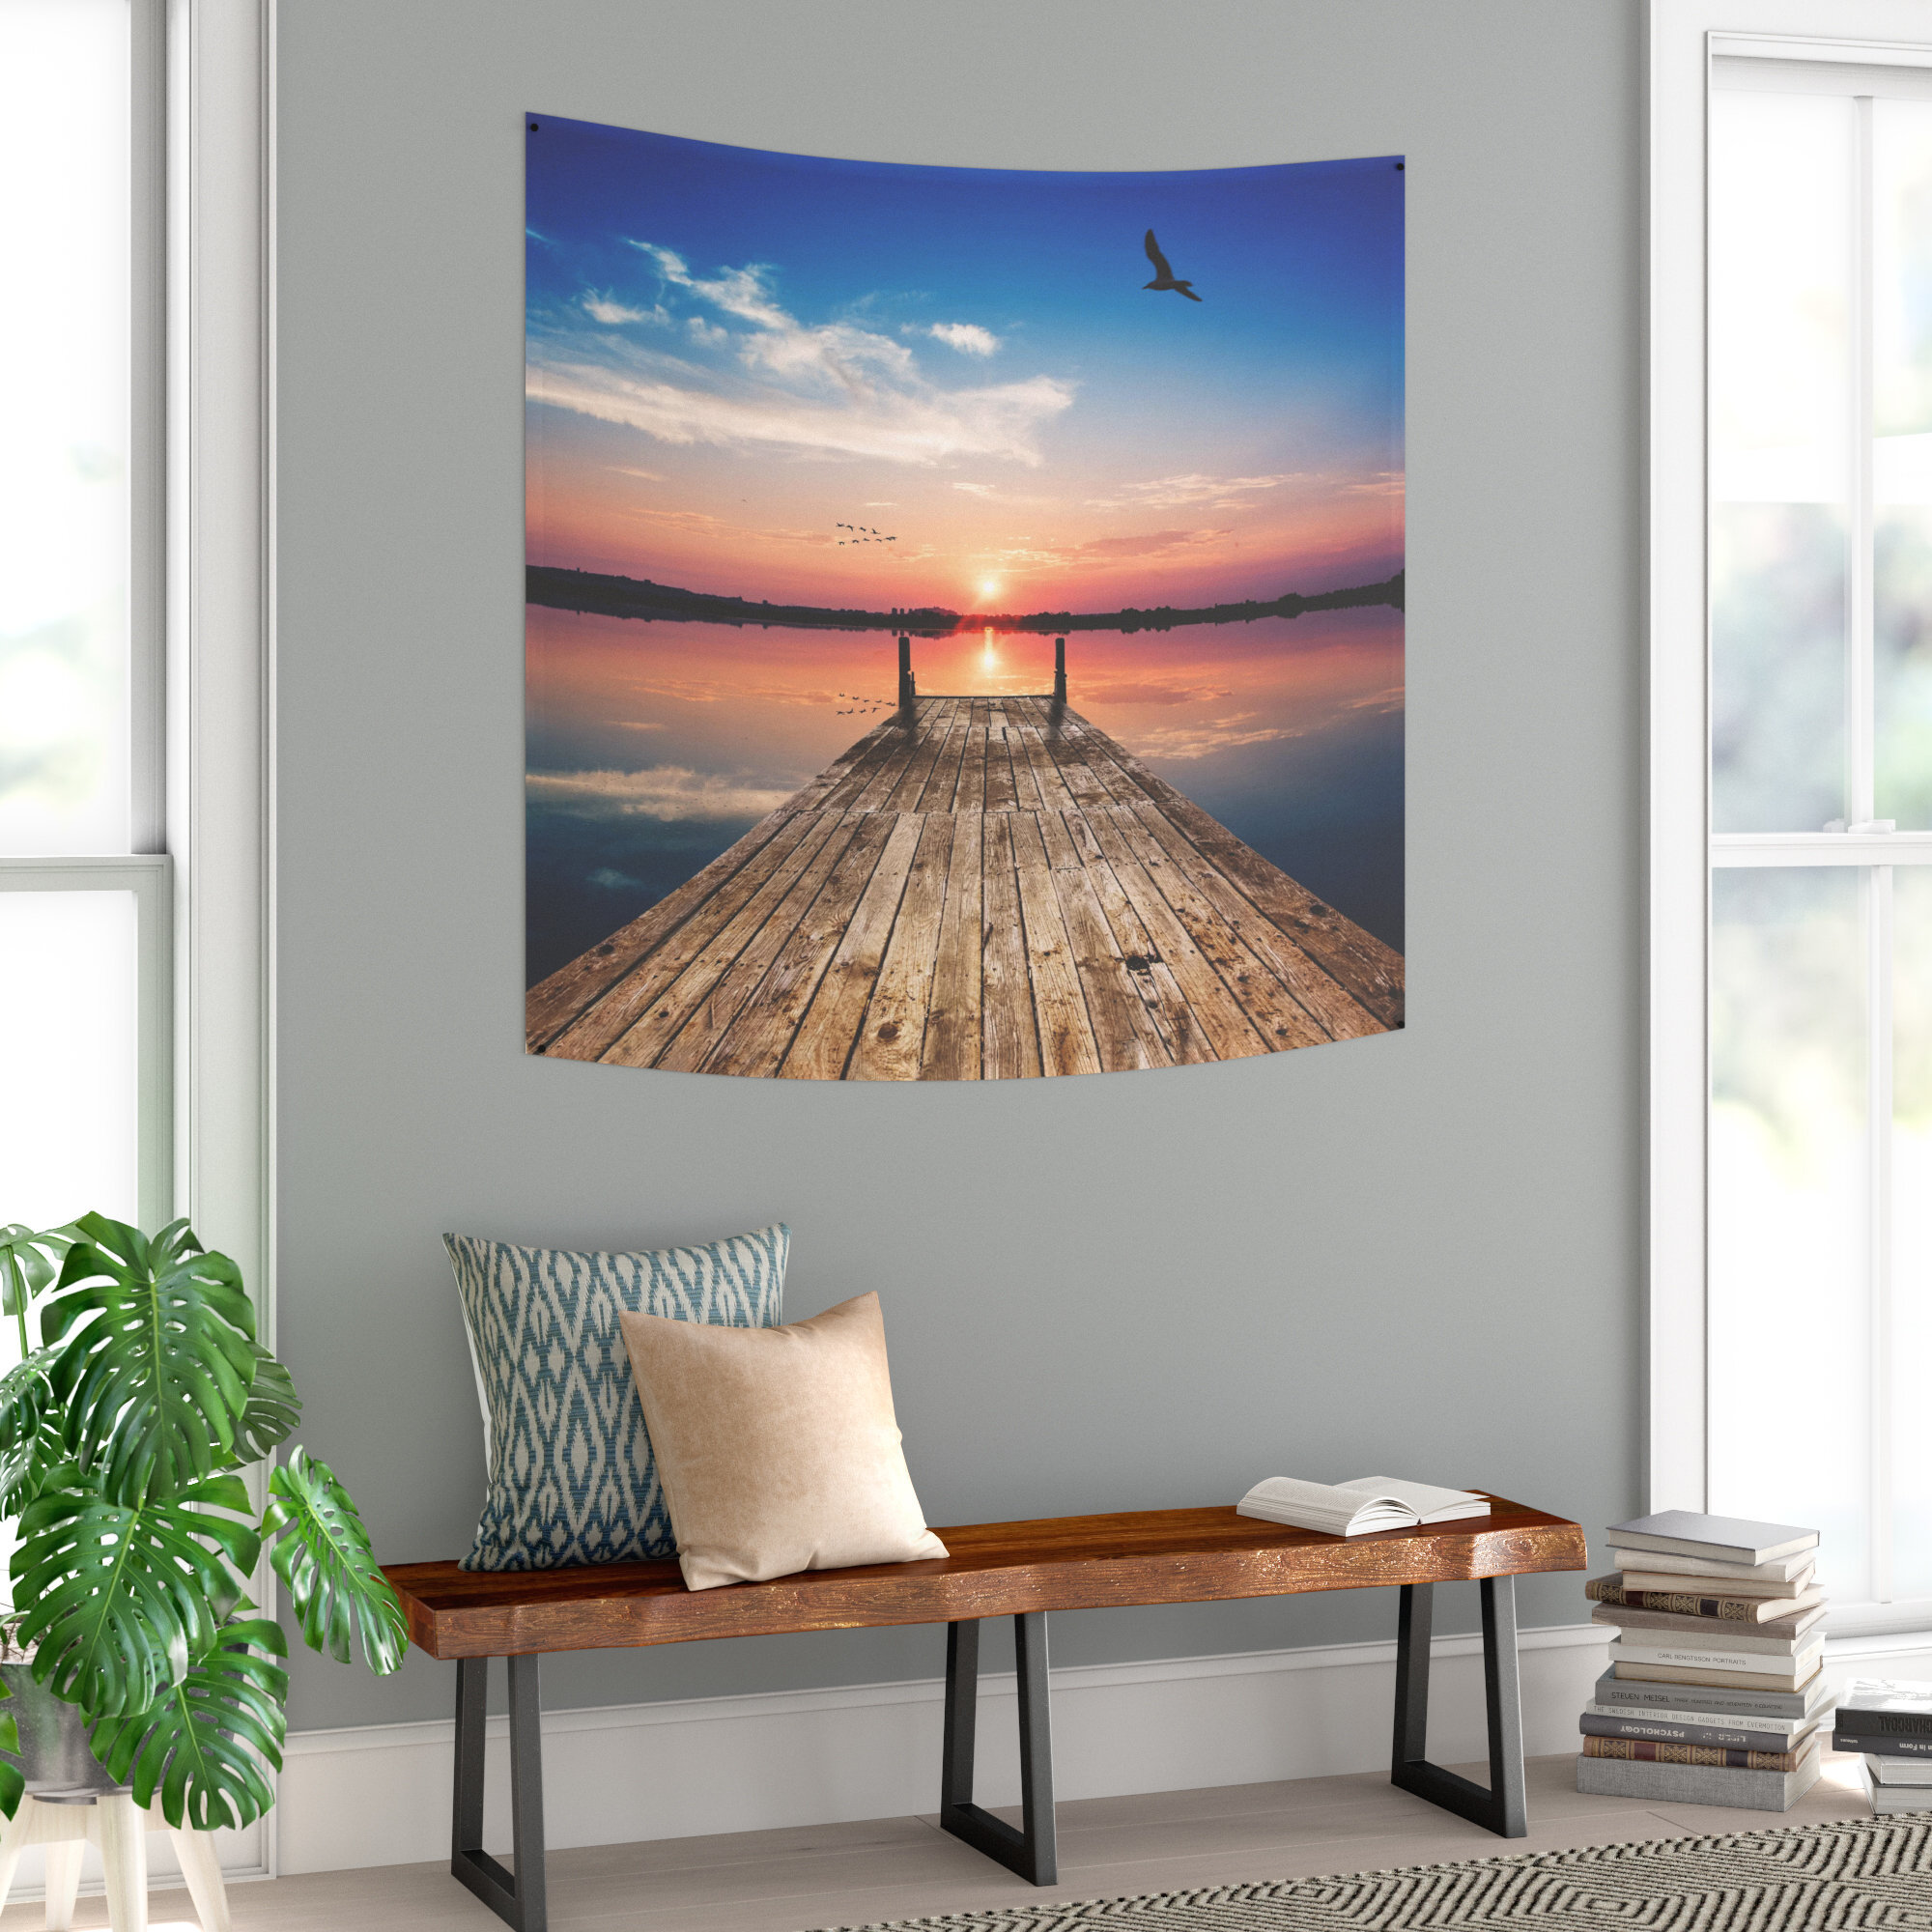 Tapestry Sea Beach Sunset Printed Tapestry Wall Hanging Tapestry Art Home Decor 